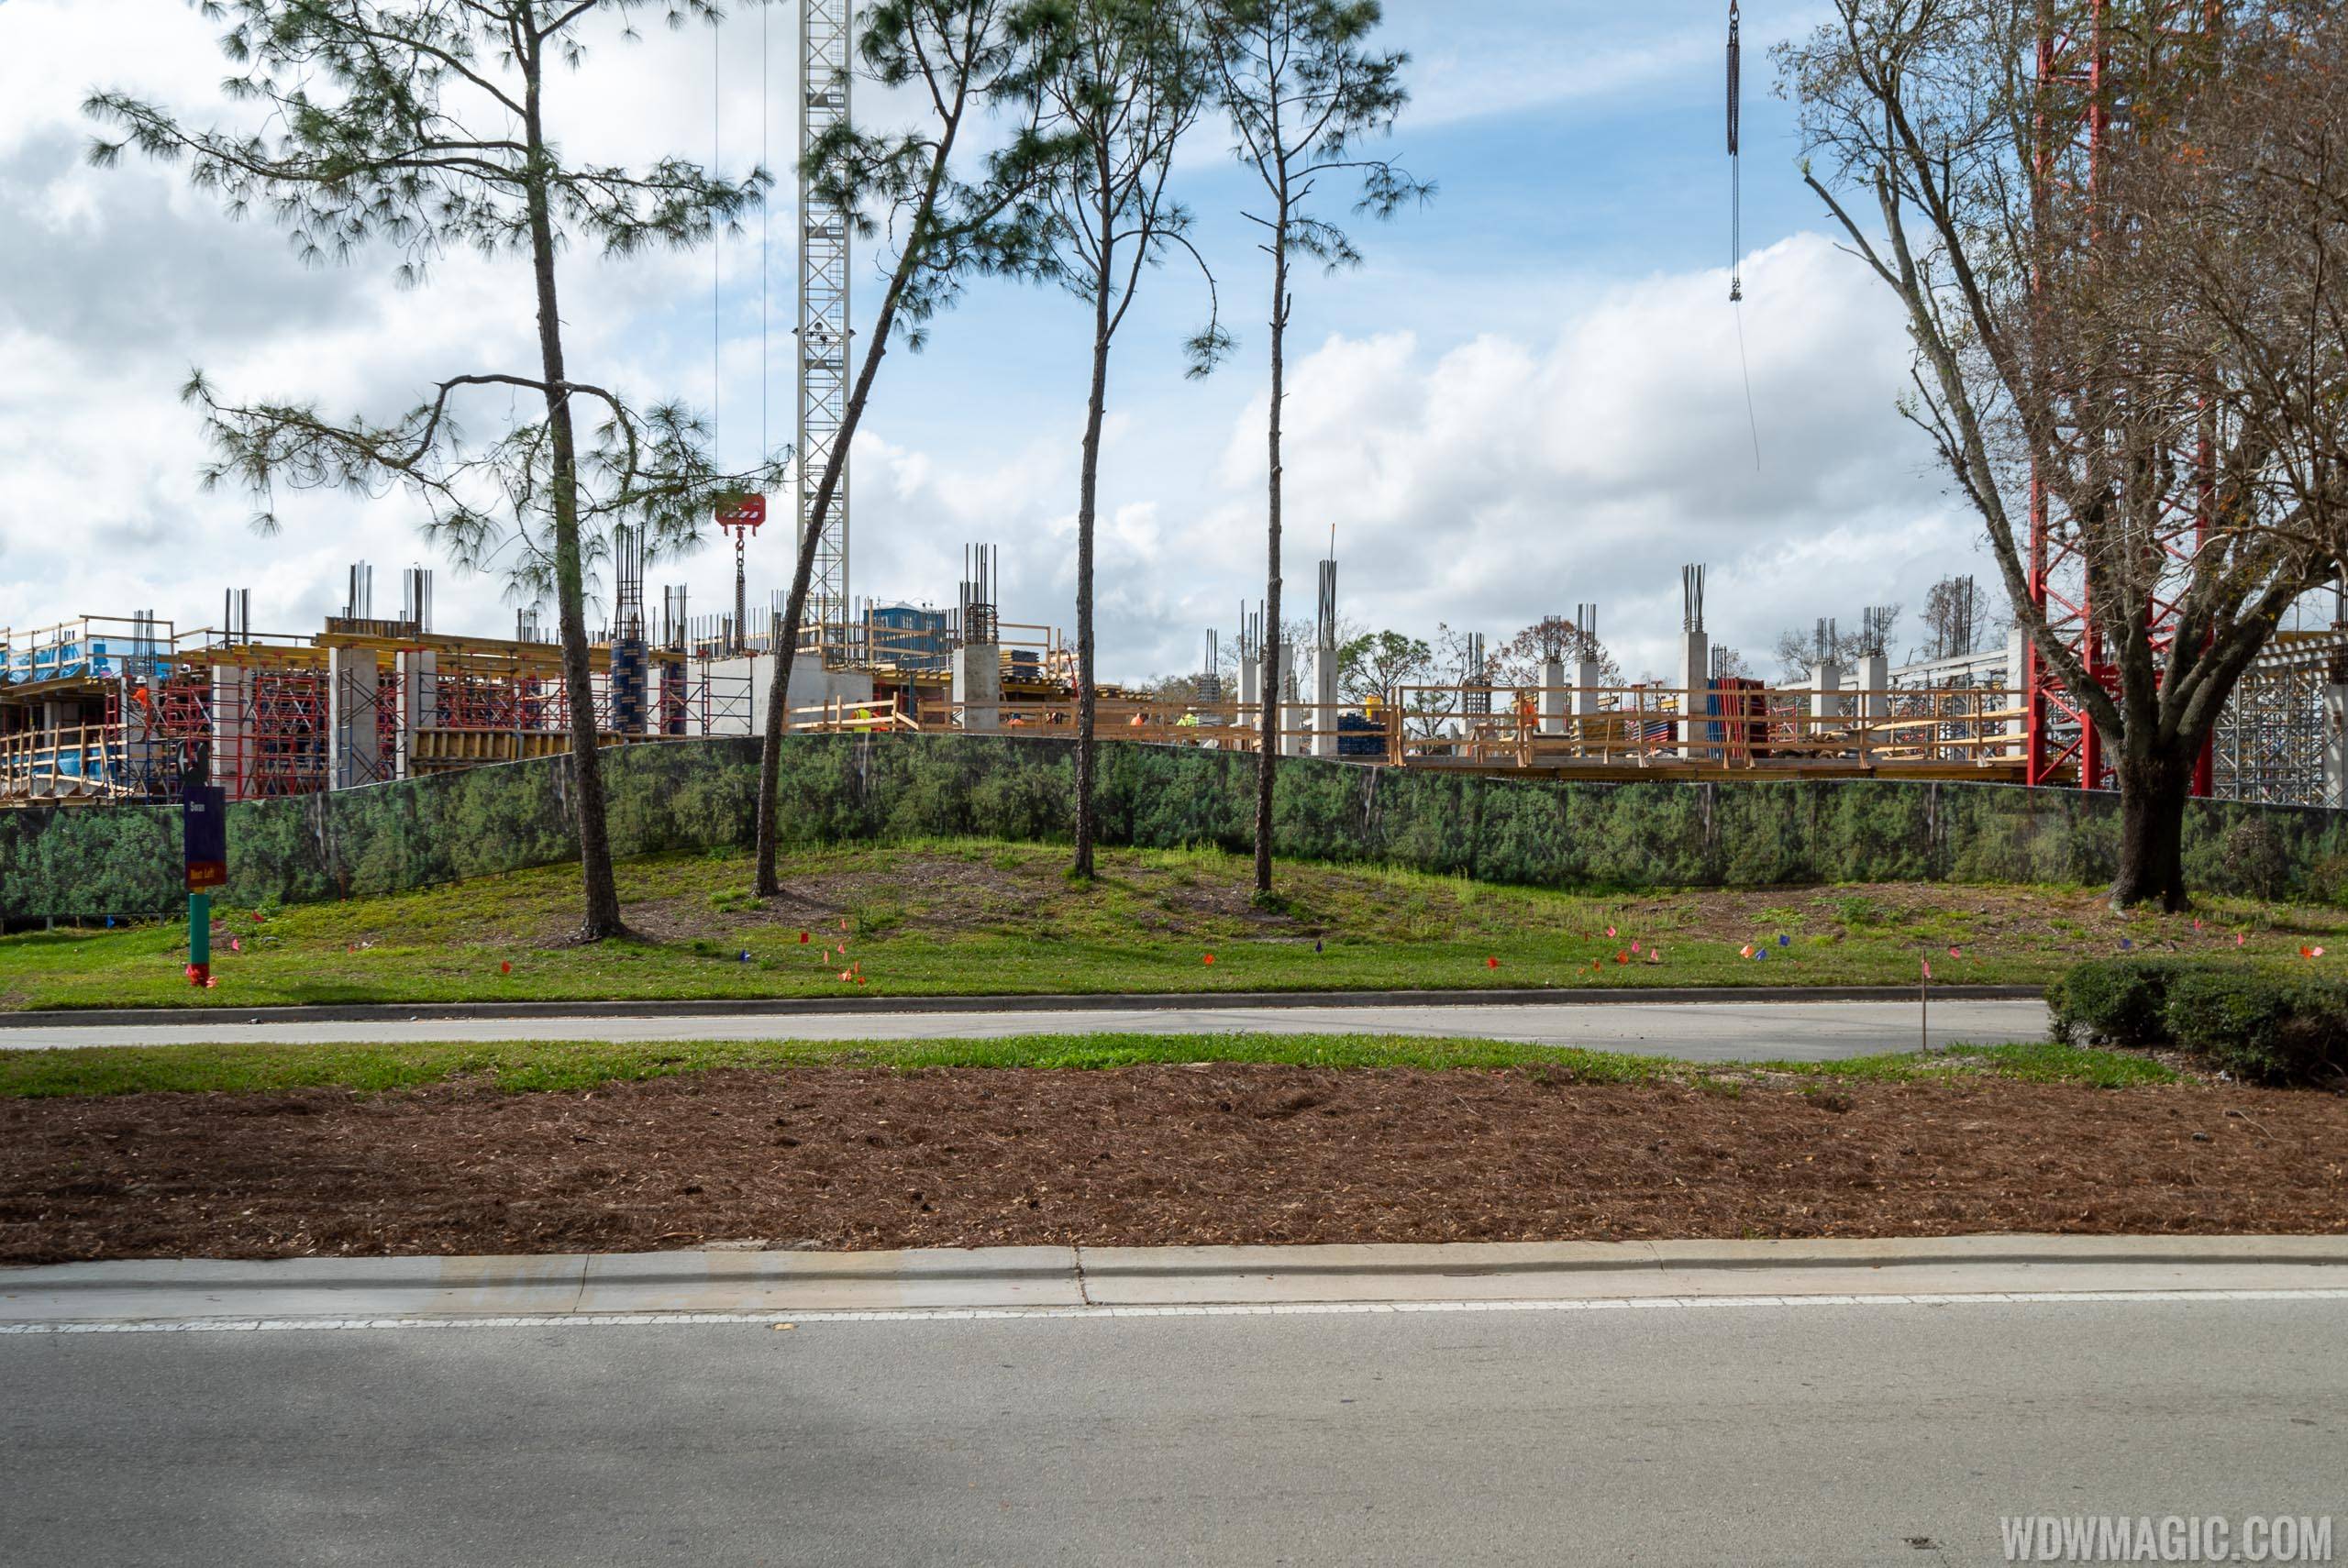 The Cove construction at the Walt Disney World Swan and Dolphin - February 2020